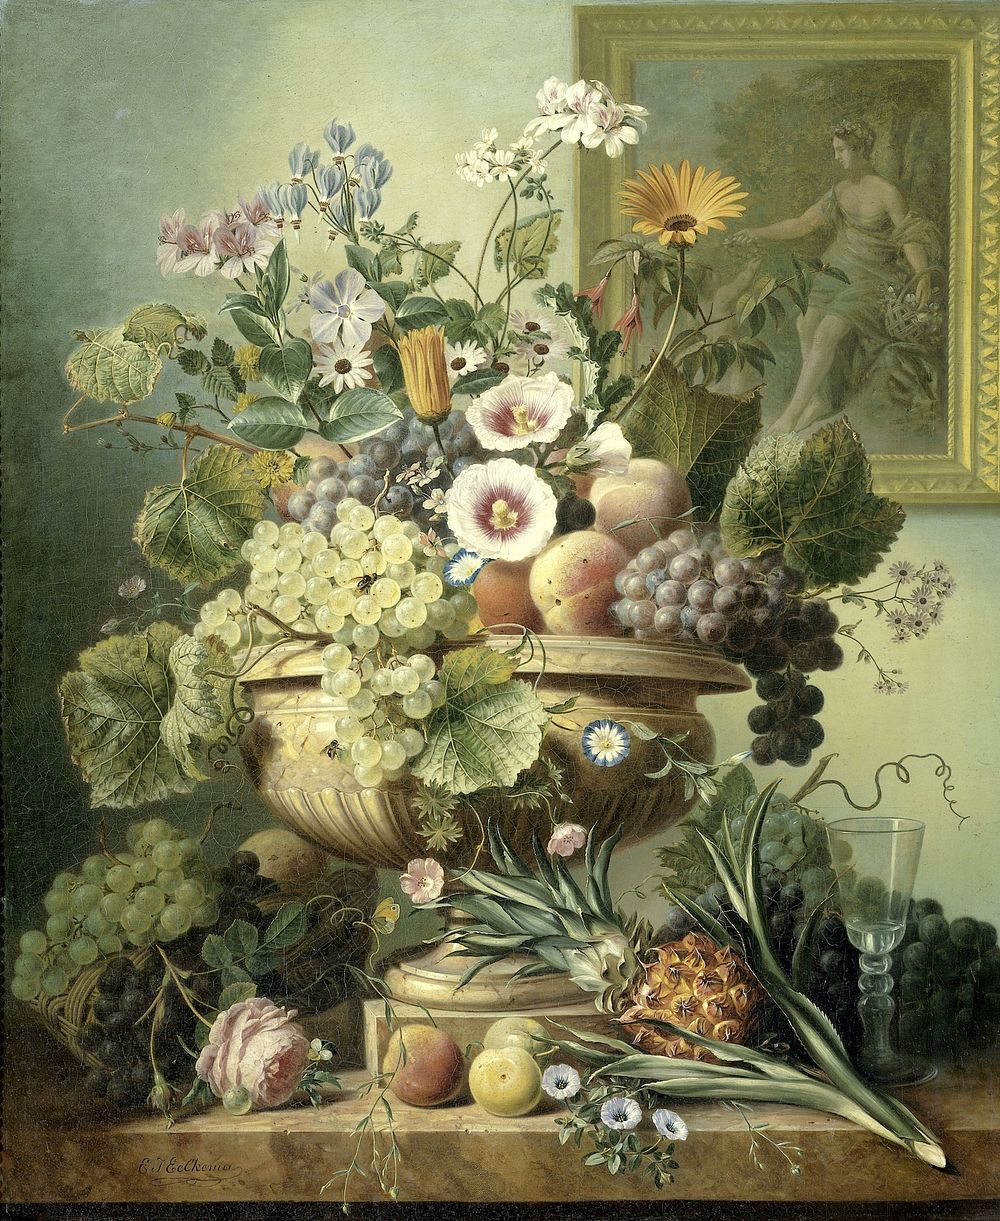 Still Life with Flowers and Fruit (1815 - 1830) by Eelke Jelles Eelkema